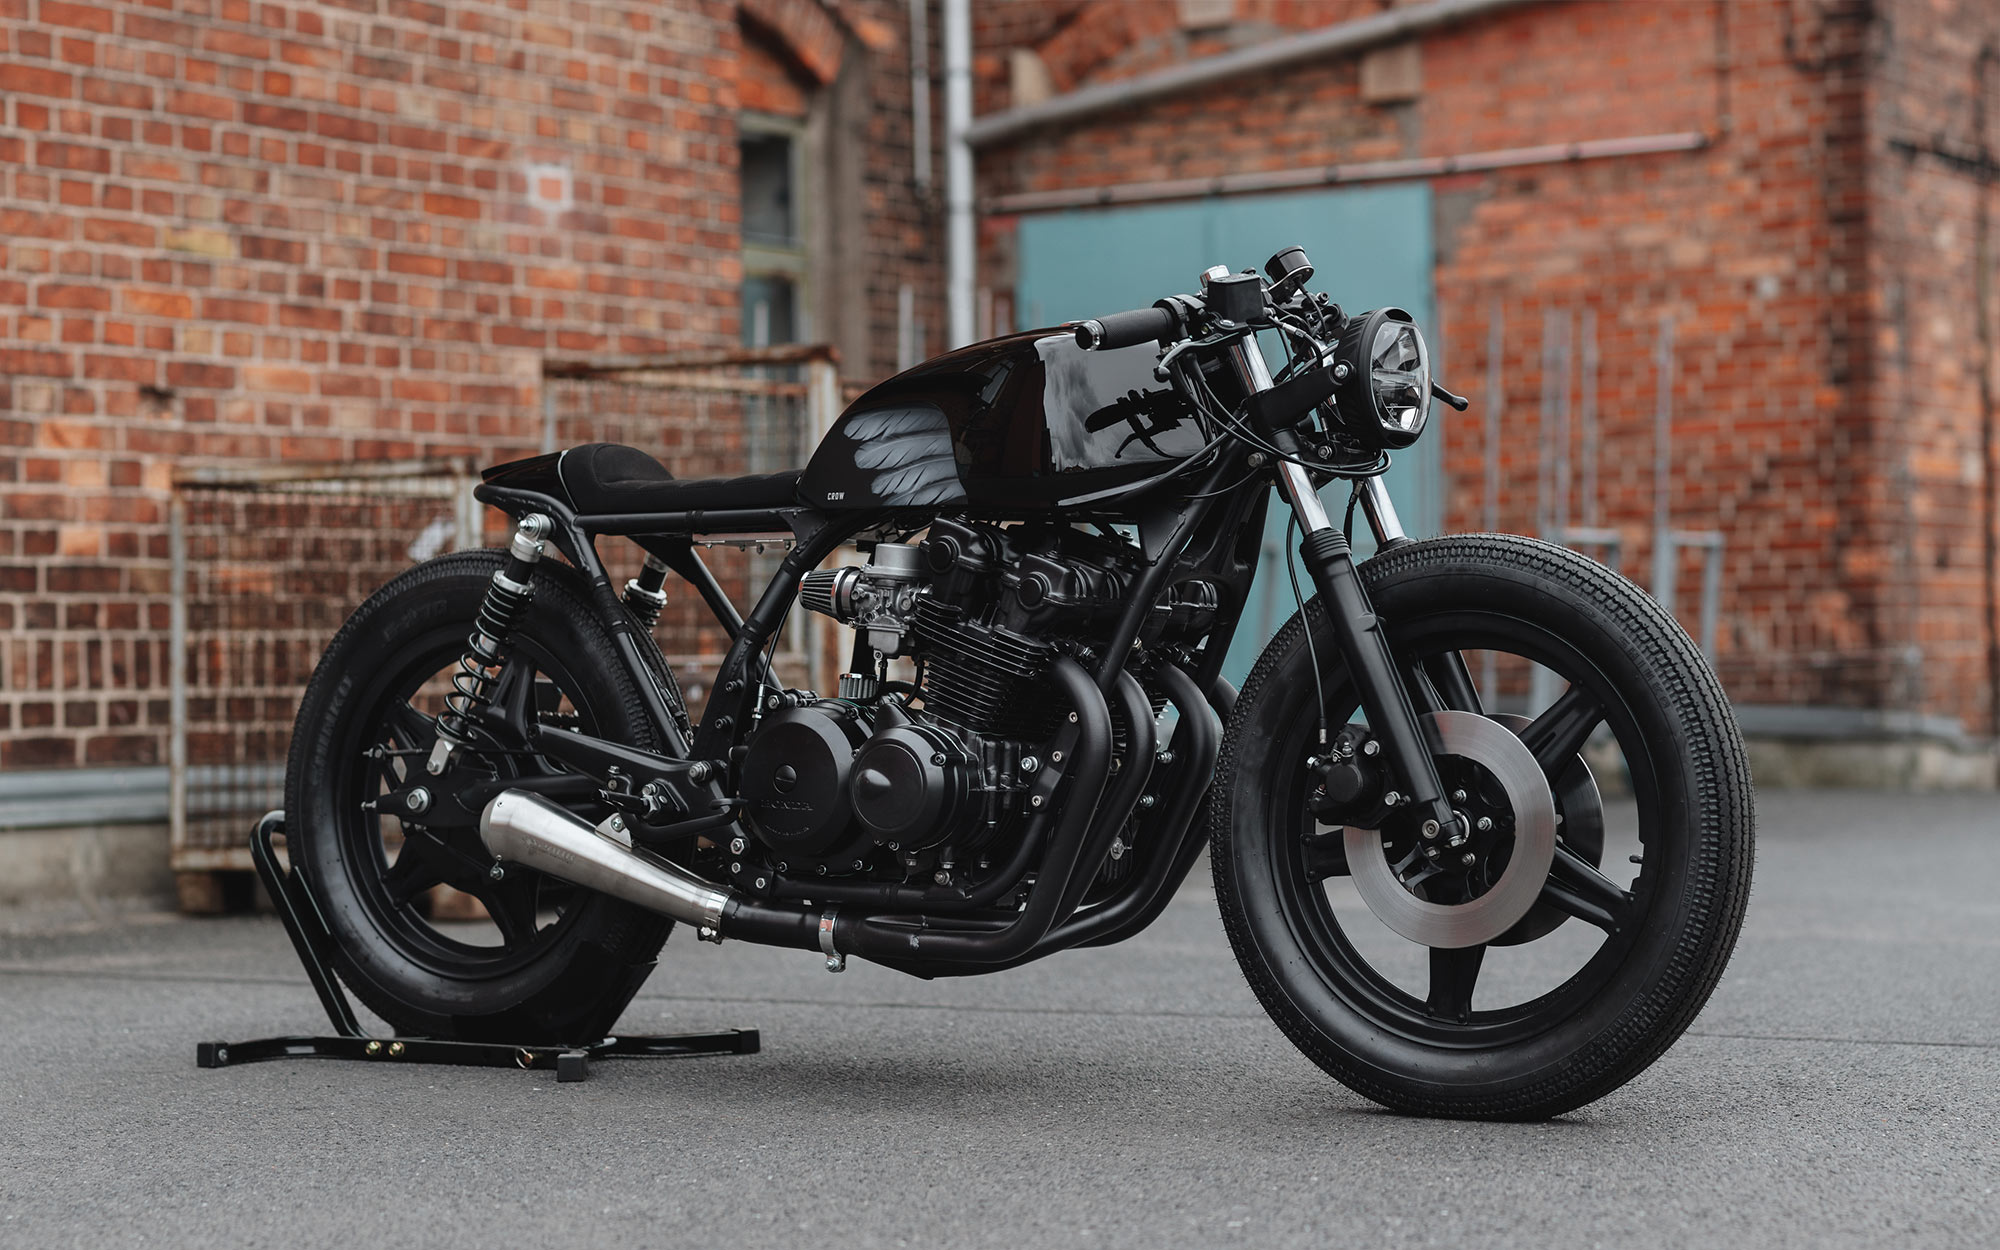 This Retro Honda Cb750 Gets A Full Makeover And Feathery Touches